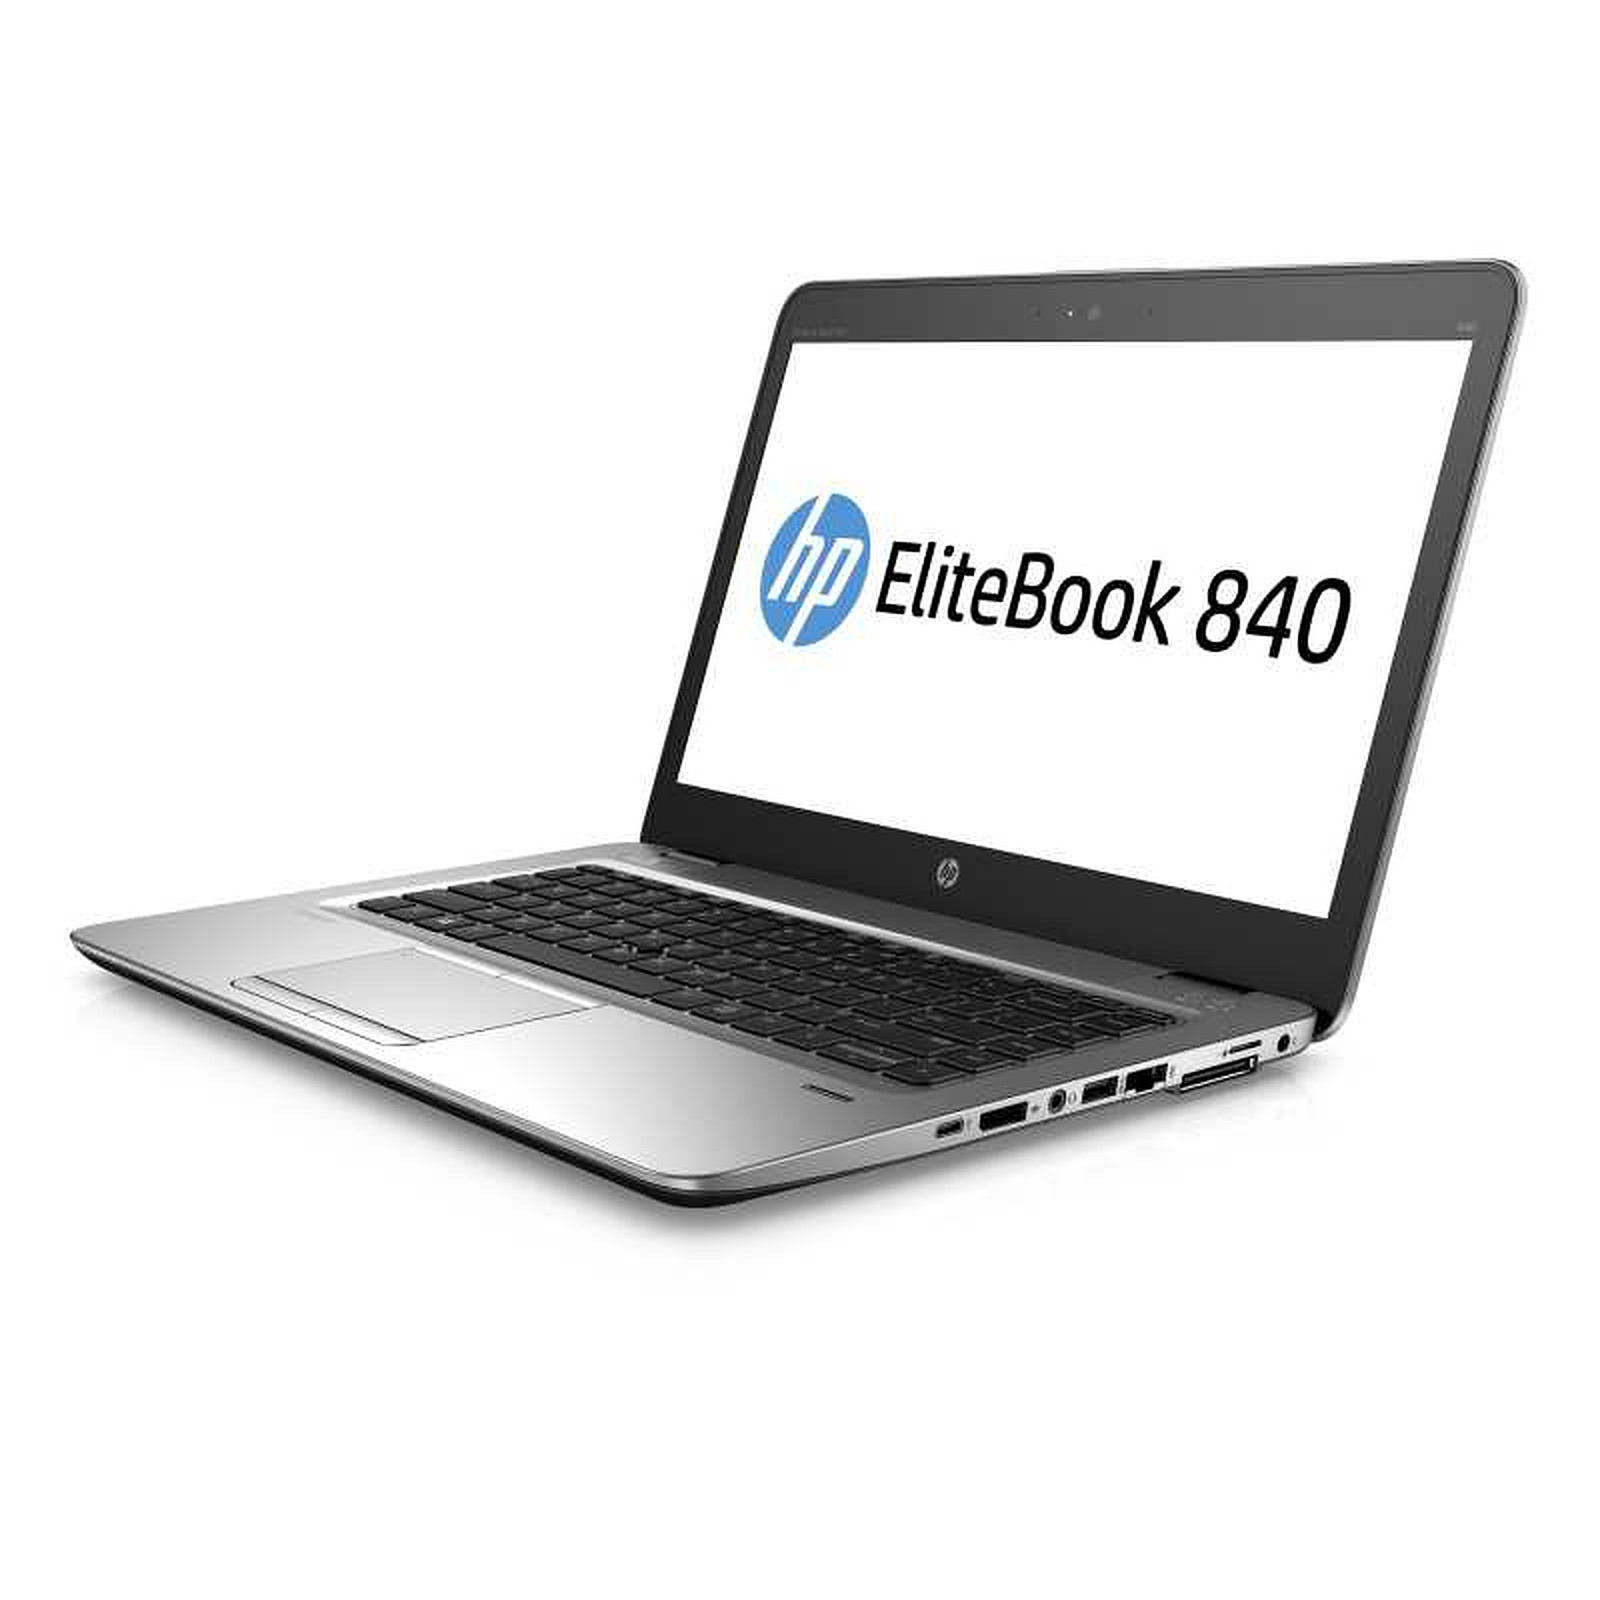 HP EliteBook 840 G3 - 8Go - HDD 500Go · Reconditionne - PC portable reconditionne HP